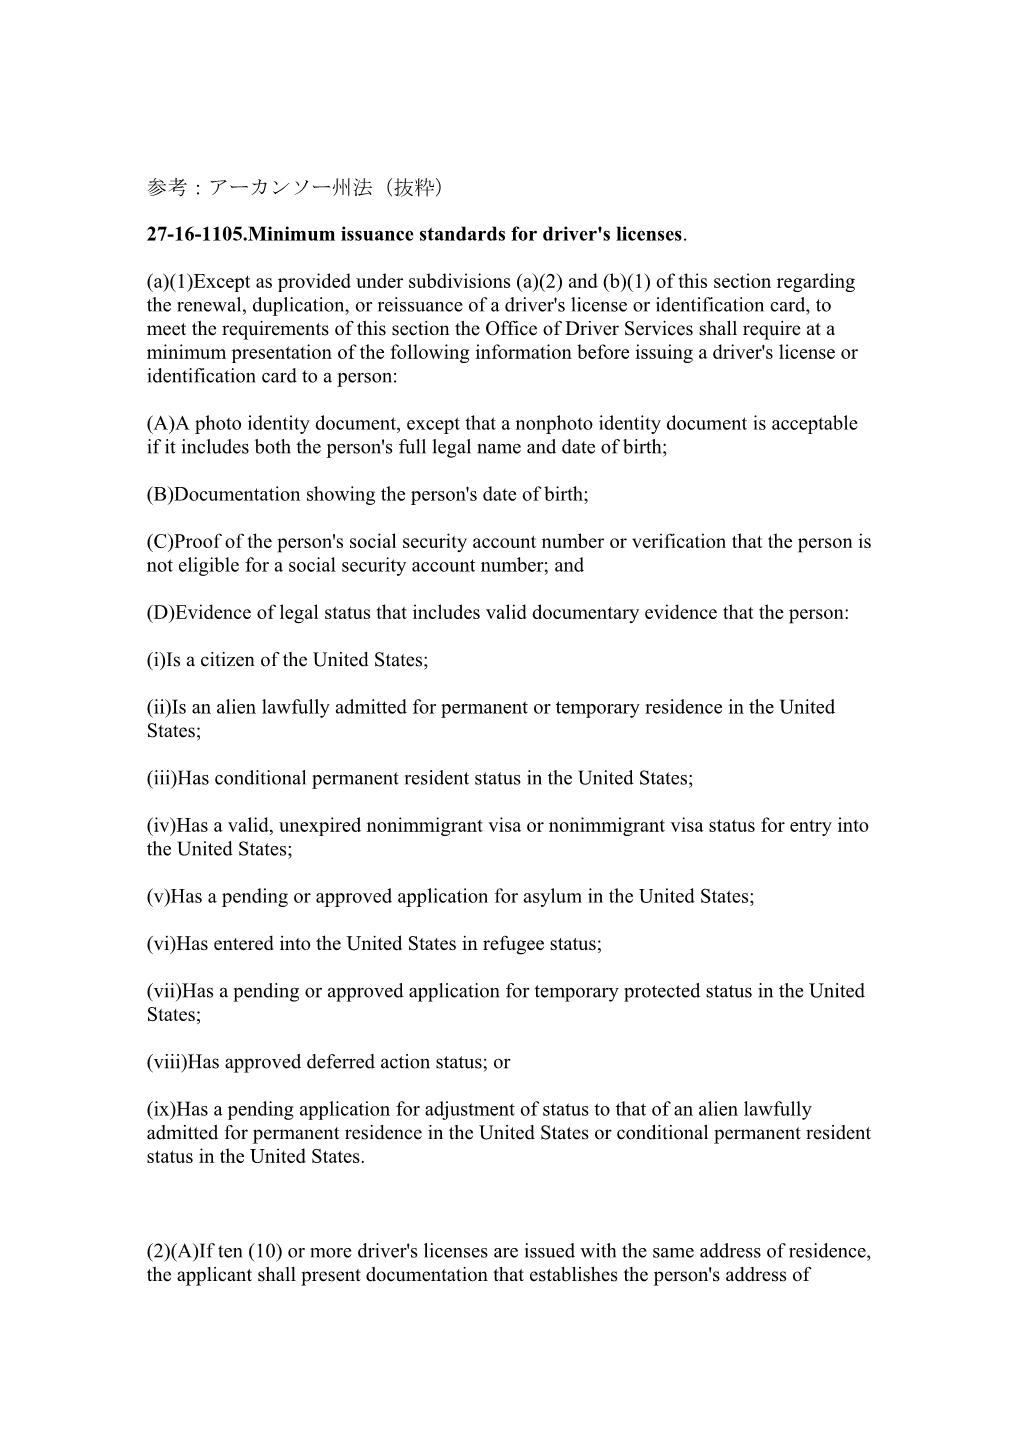 27-16-1105.Minimum Issuance Standards for Driver's Licenses . (A)(1)Except As Provided